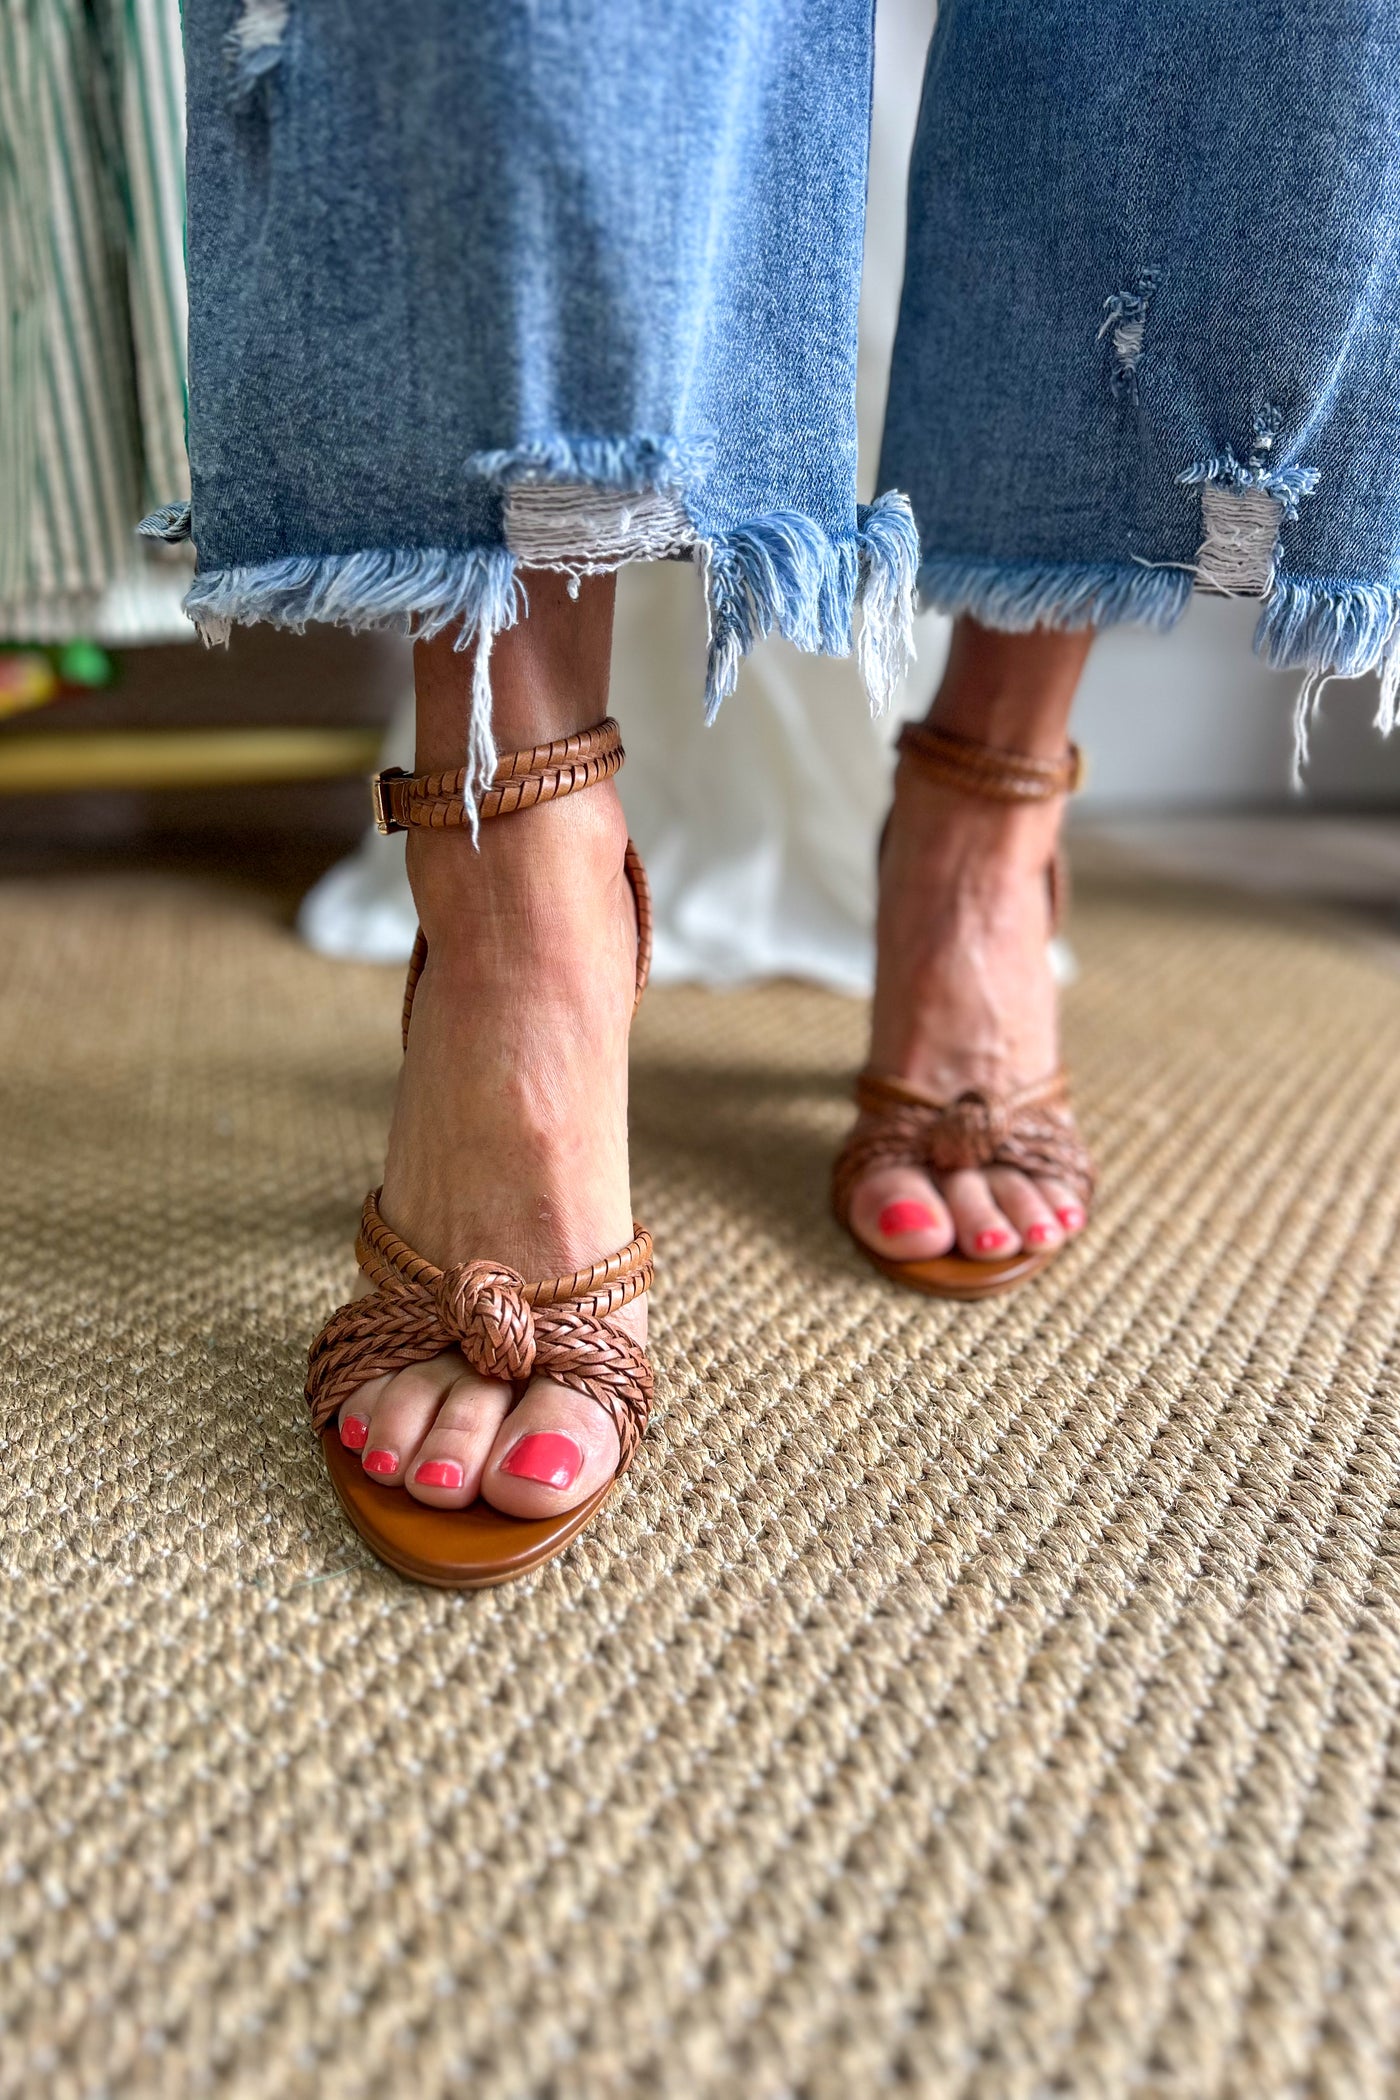 Malou Sandals by Steve Madden